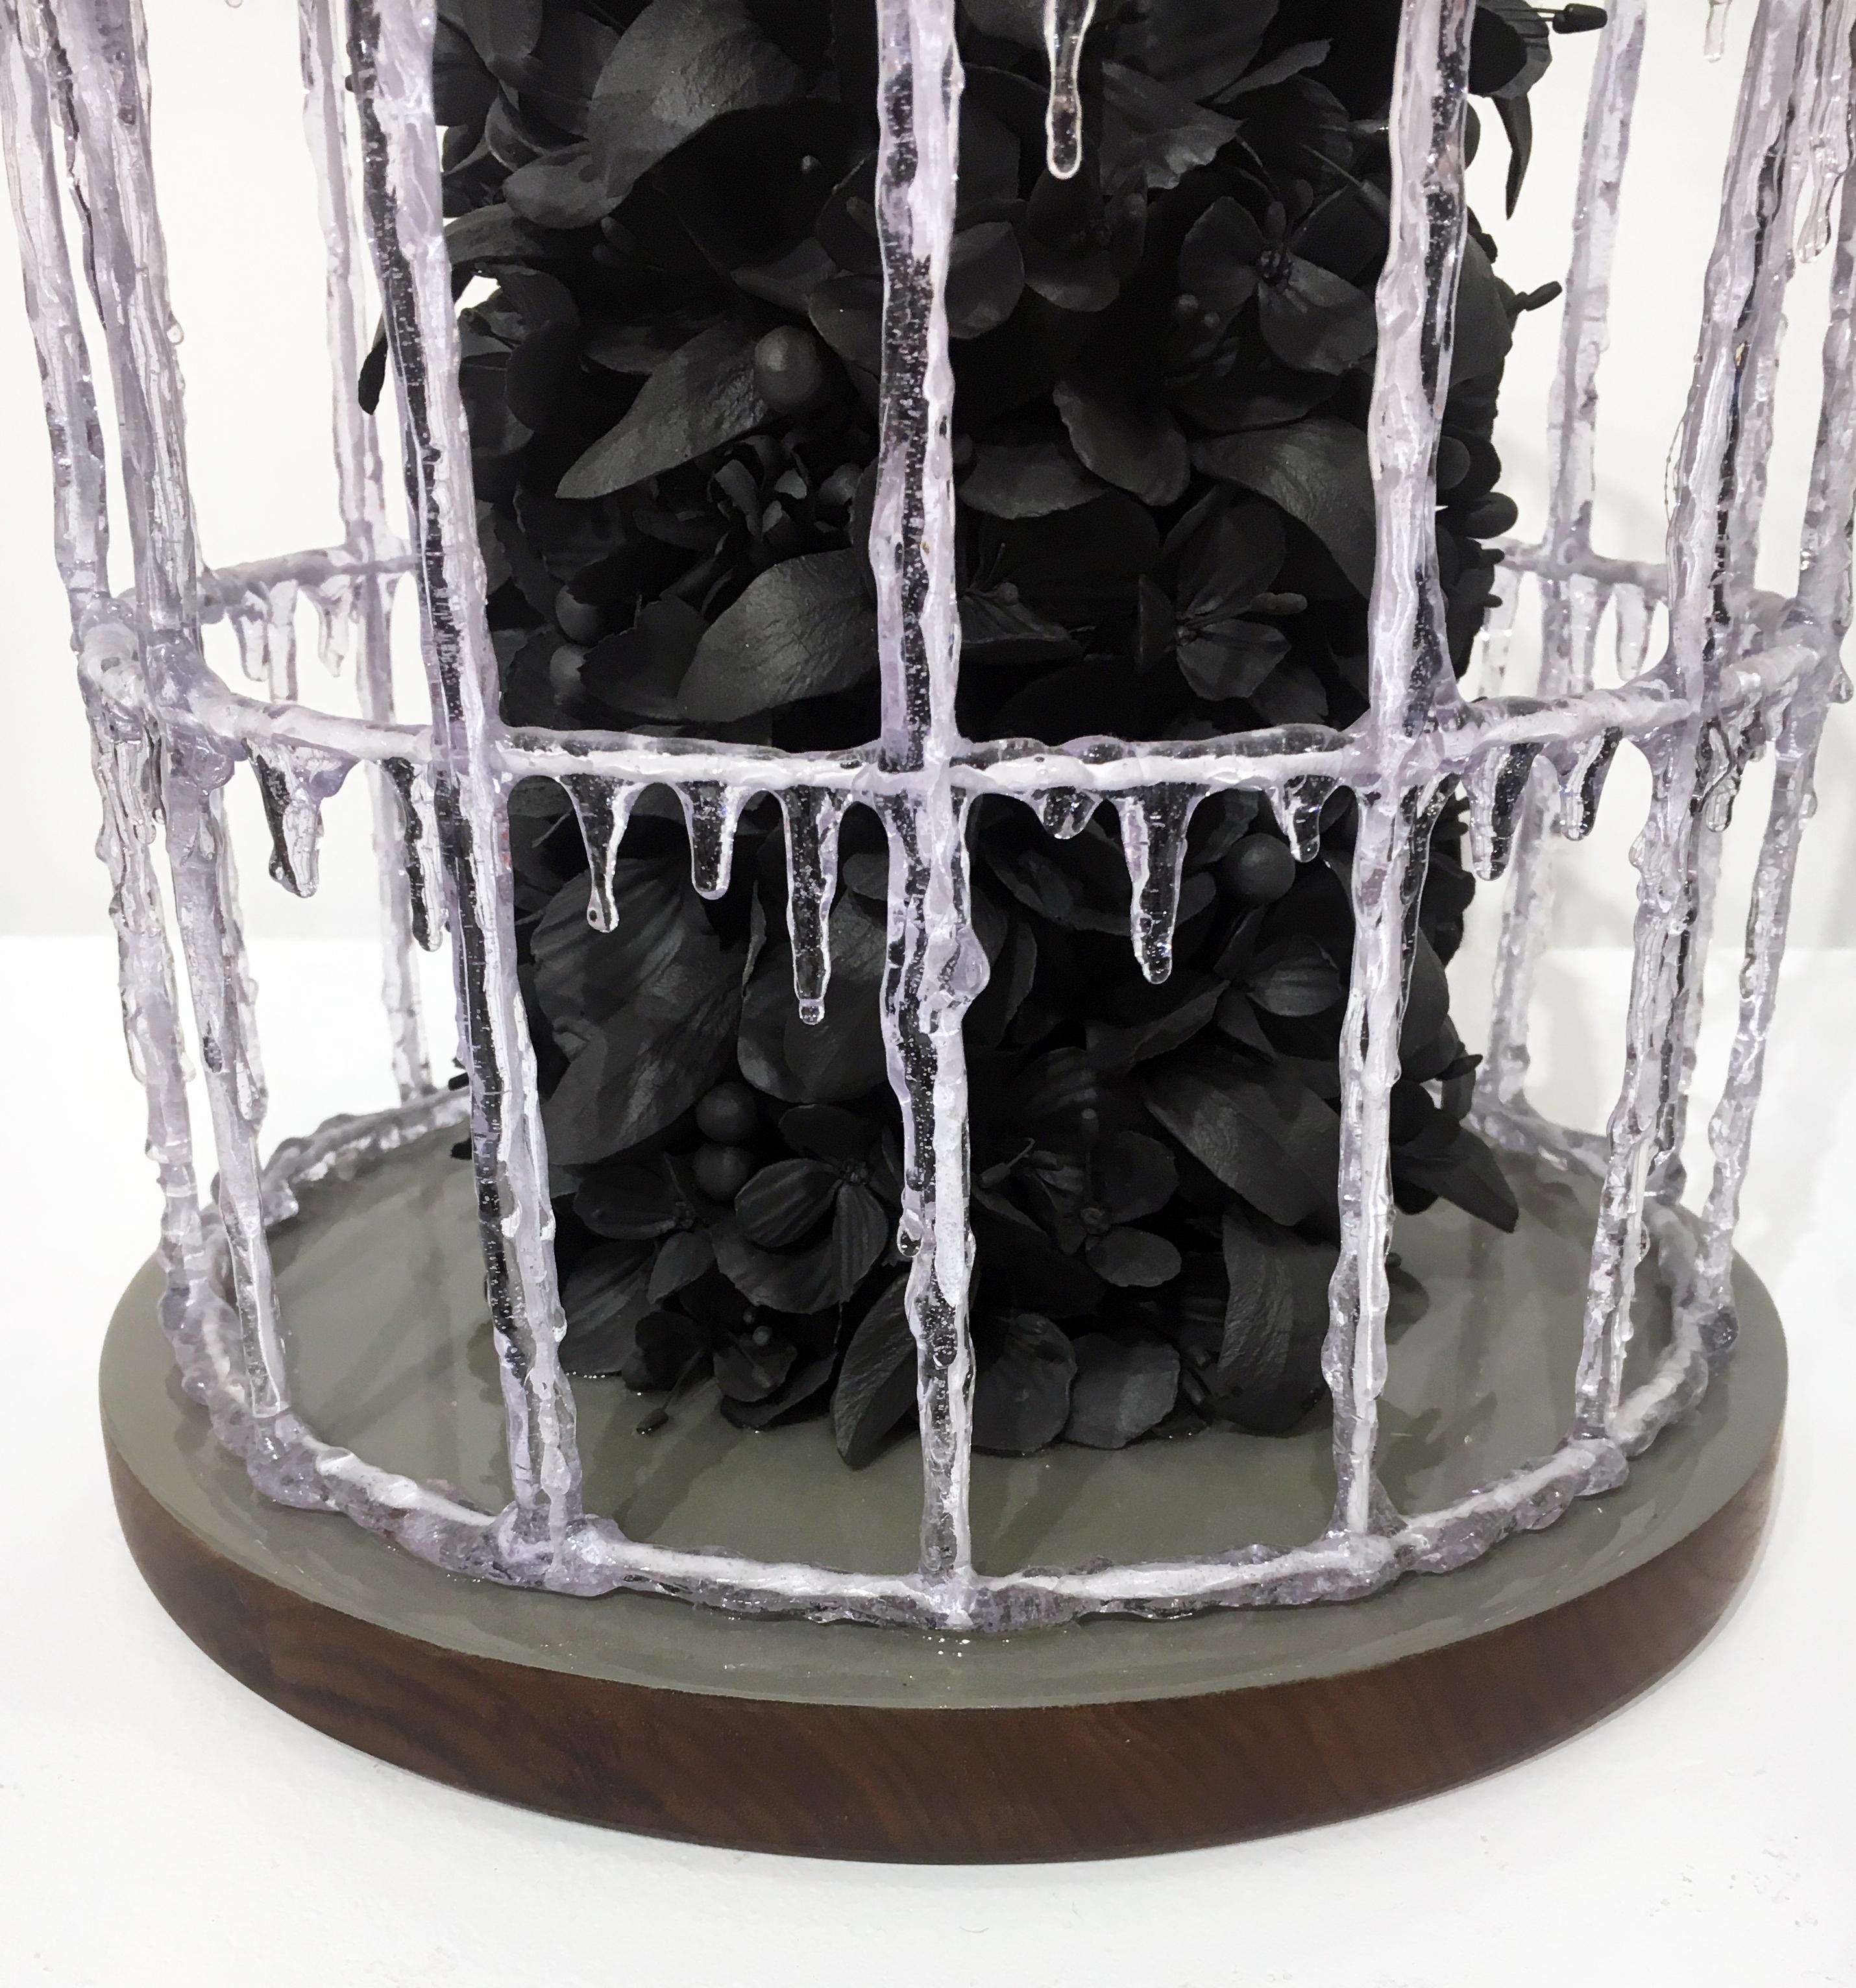 Noir Buisson by Rain Harris, Hand Sculpted Black Clay with Resin and Wood Base 2